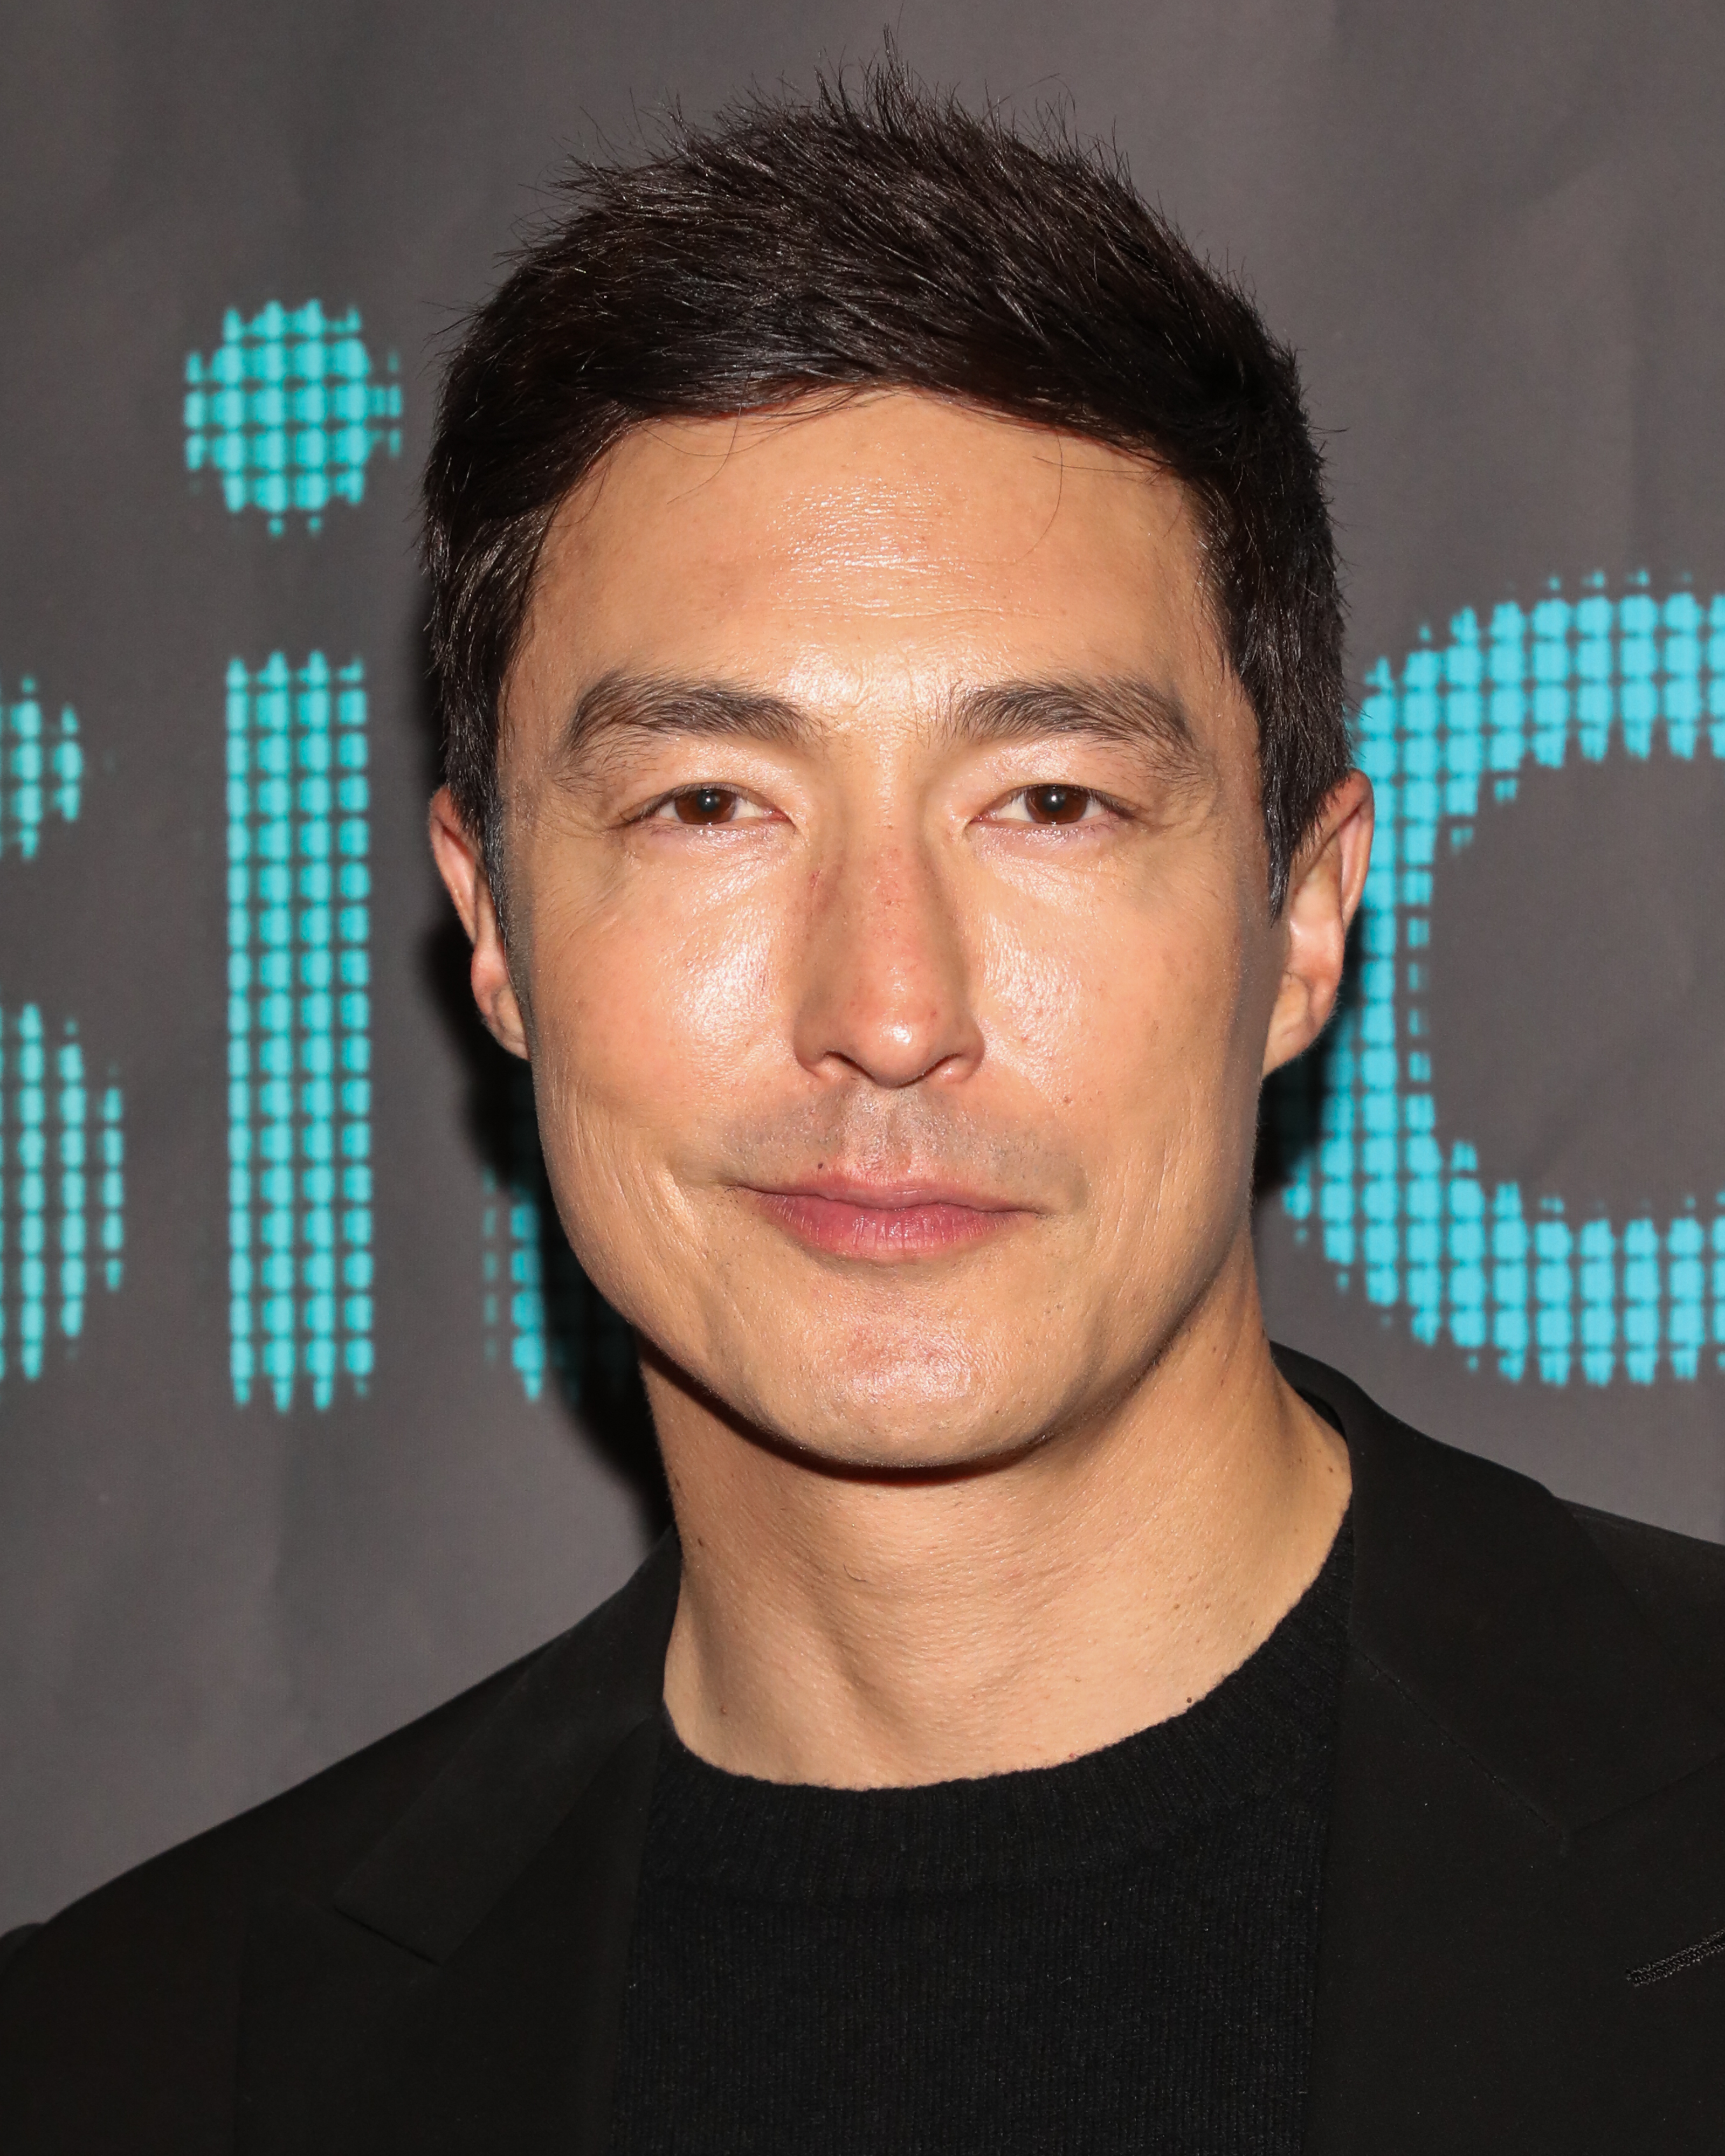 Daniel Henney at the screening of "Missing" on January 17, 2023, in Los Angeles, California. | Source: Getty Images